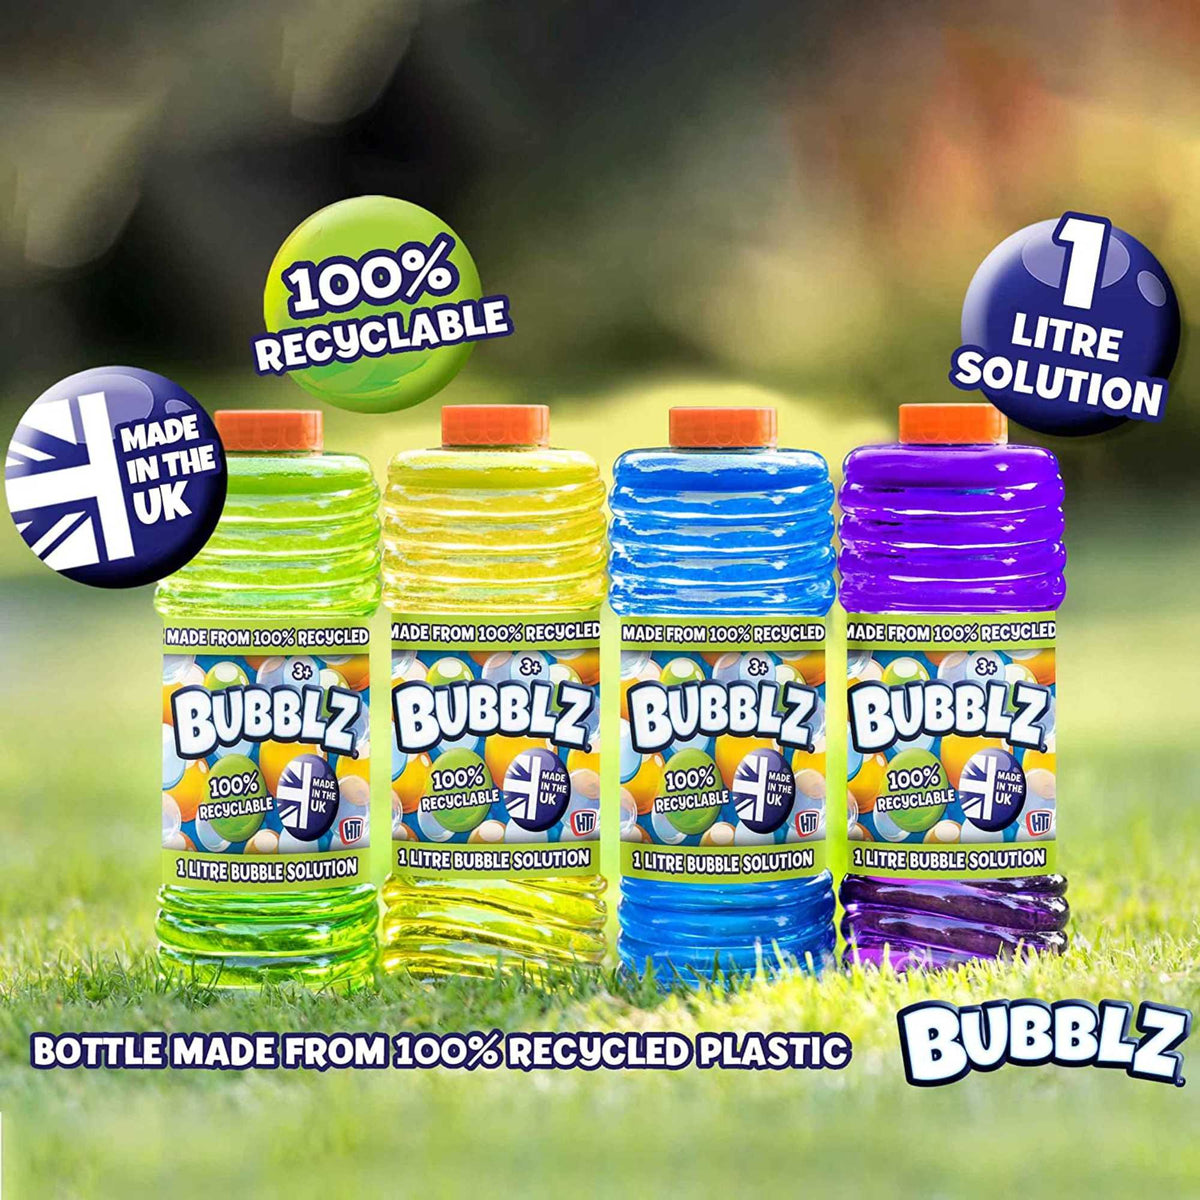 Bubblz 1Ltr. Bubble Solution Made From 100% Recycled Plastic